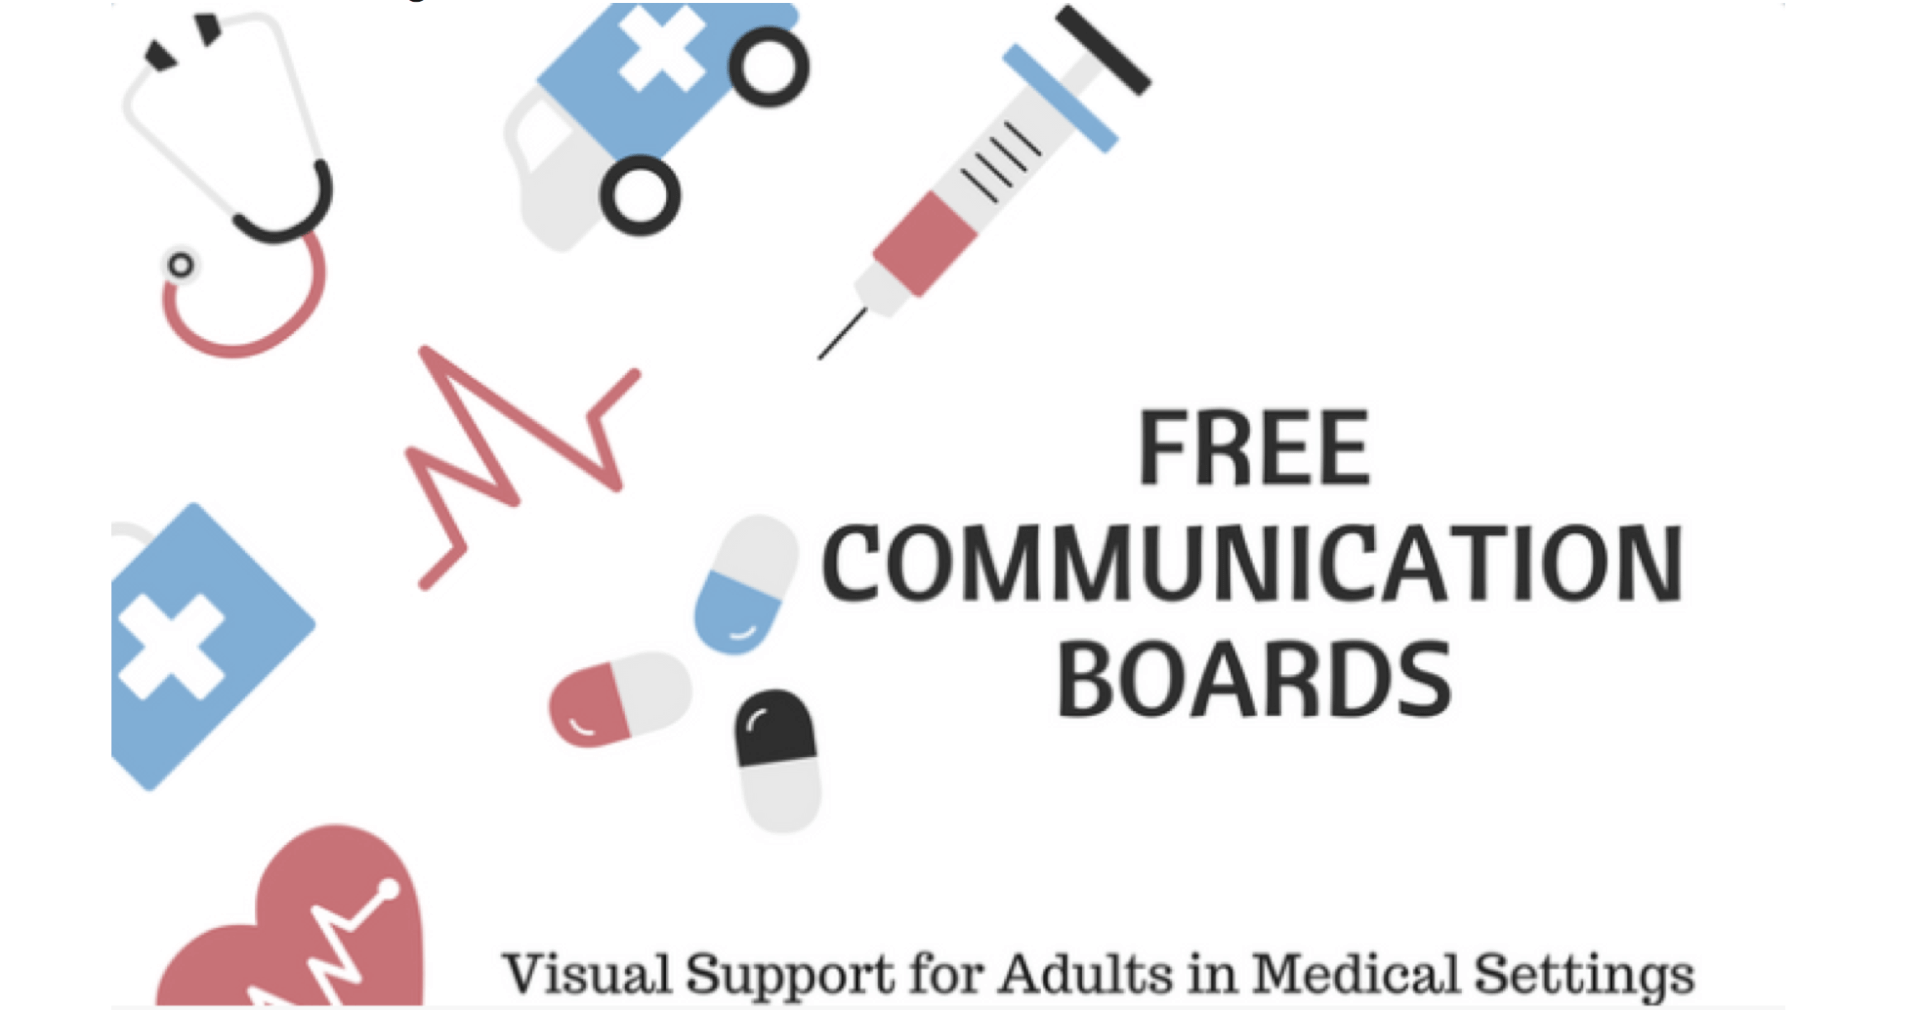 nursing-home-free-printable-communication-boards-for-adults-free